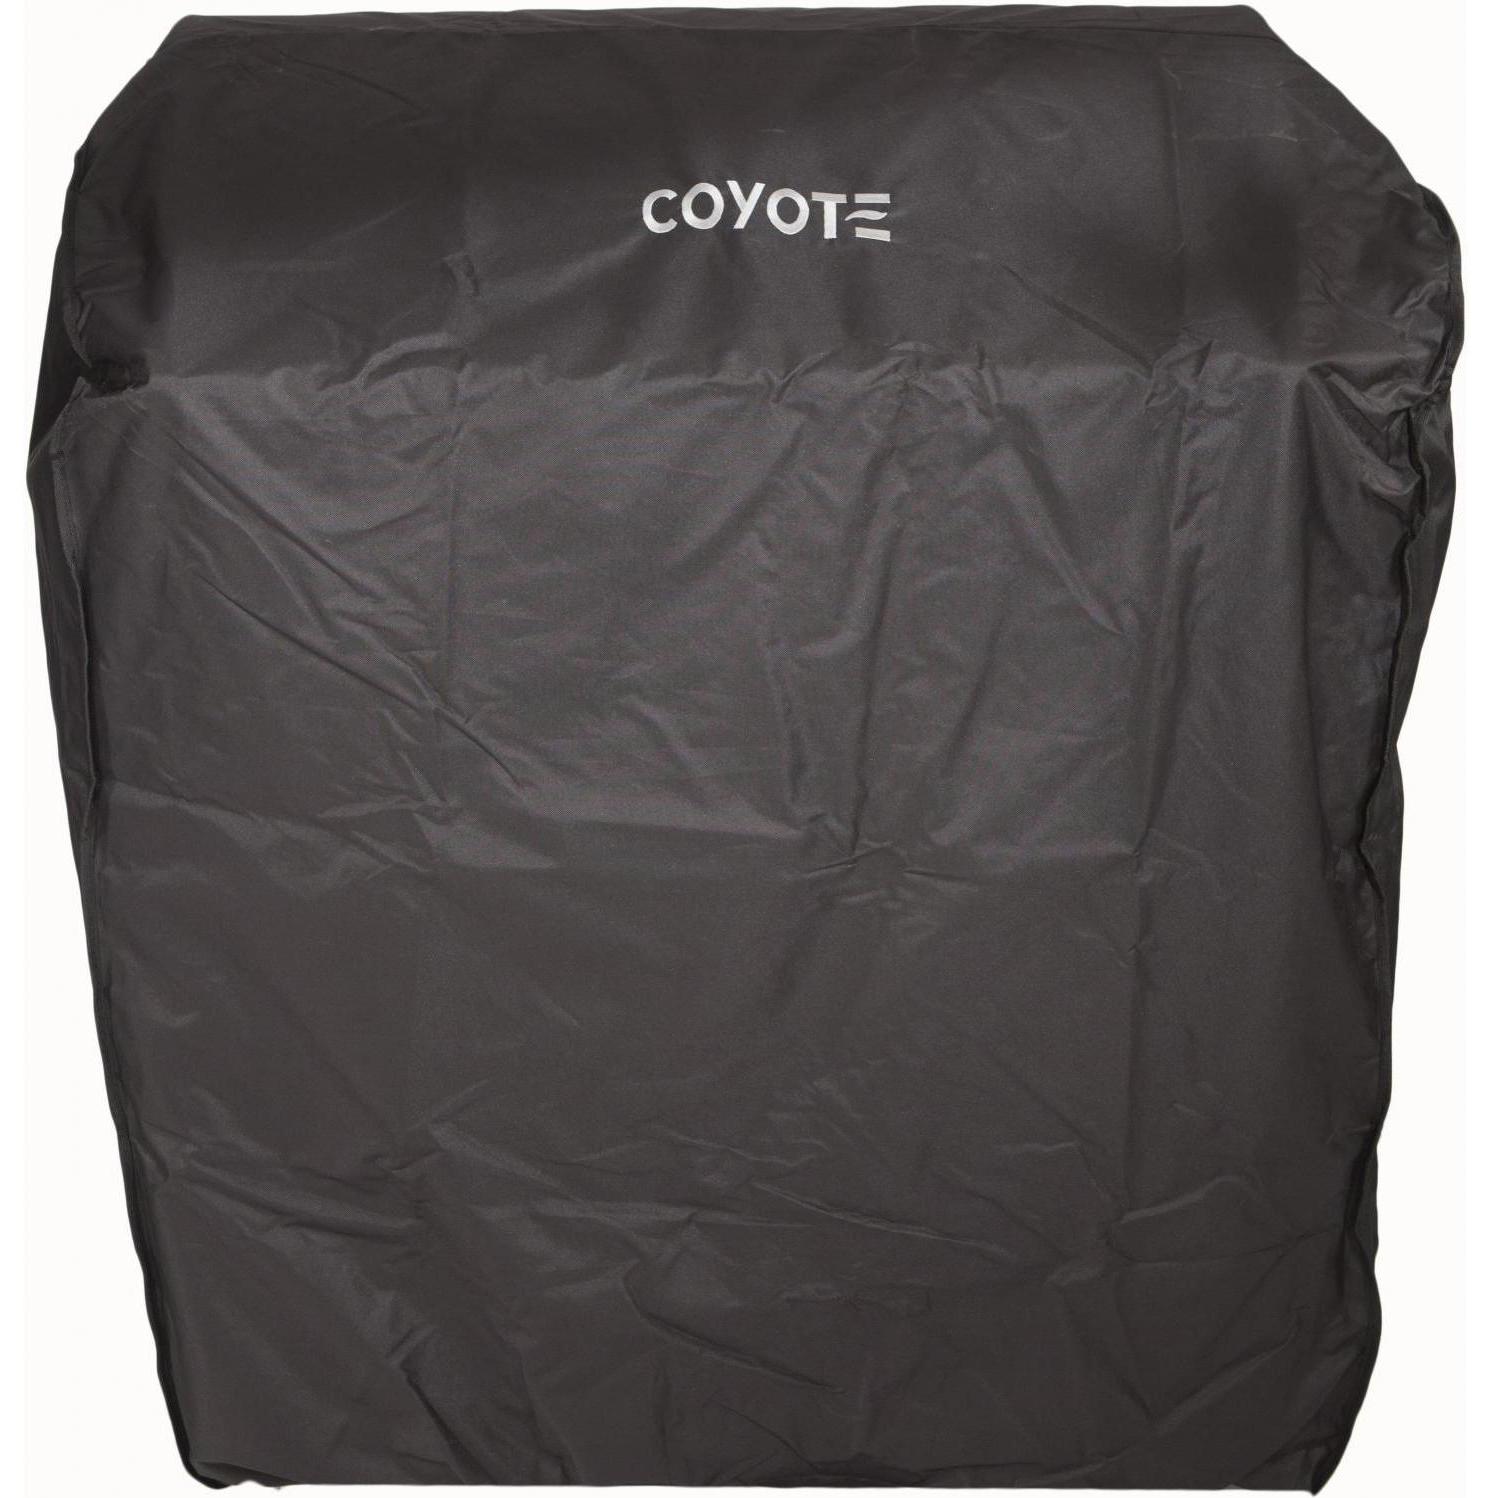 Coyote Outdoor Living 30” Grill Cover-Black